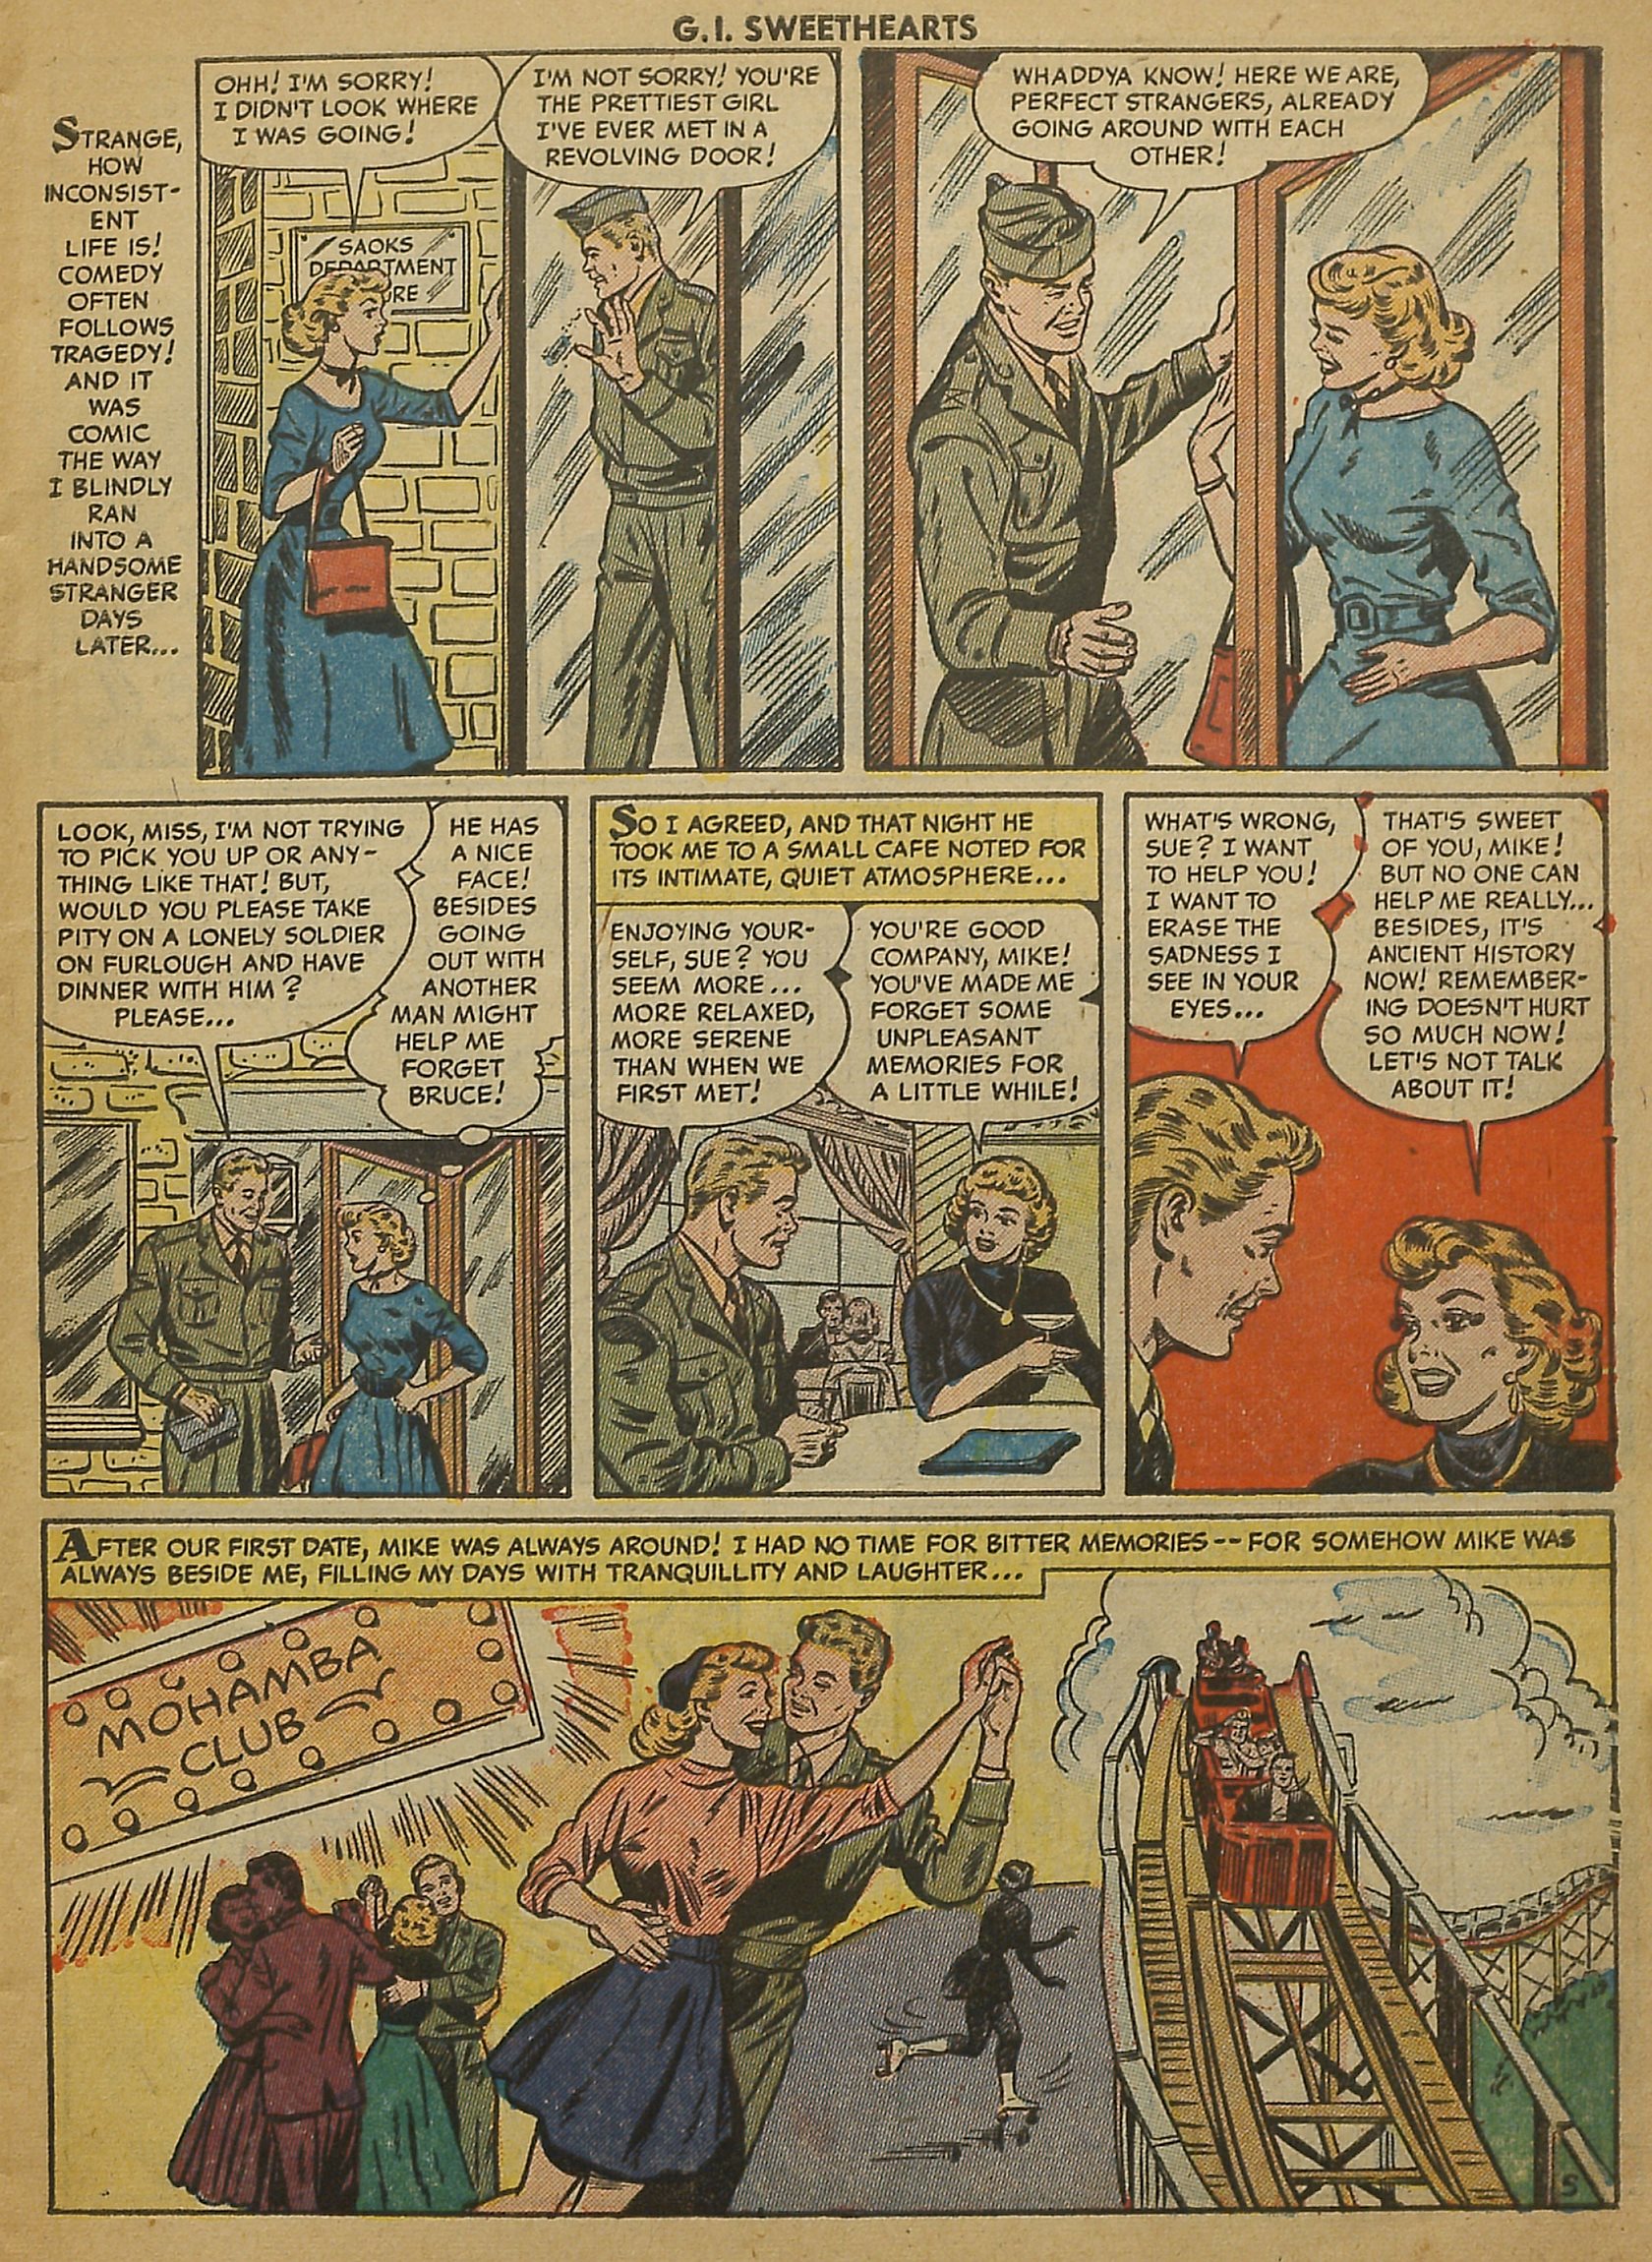 Read online G.I. Sweethearts comic -  Issue #35 - 7